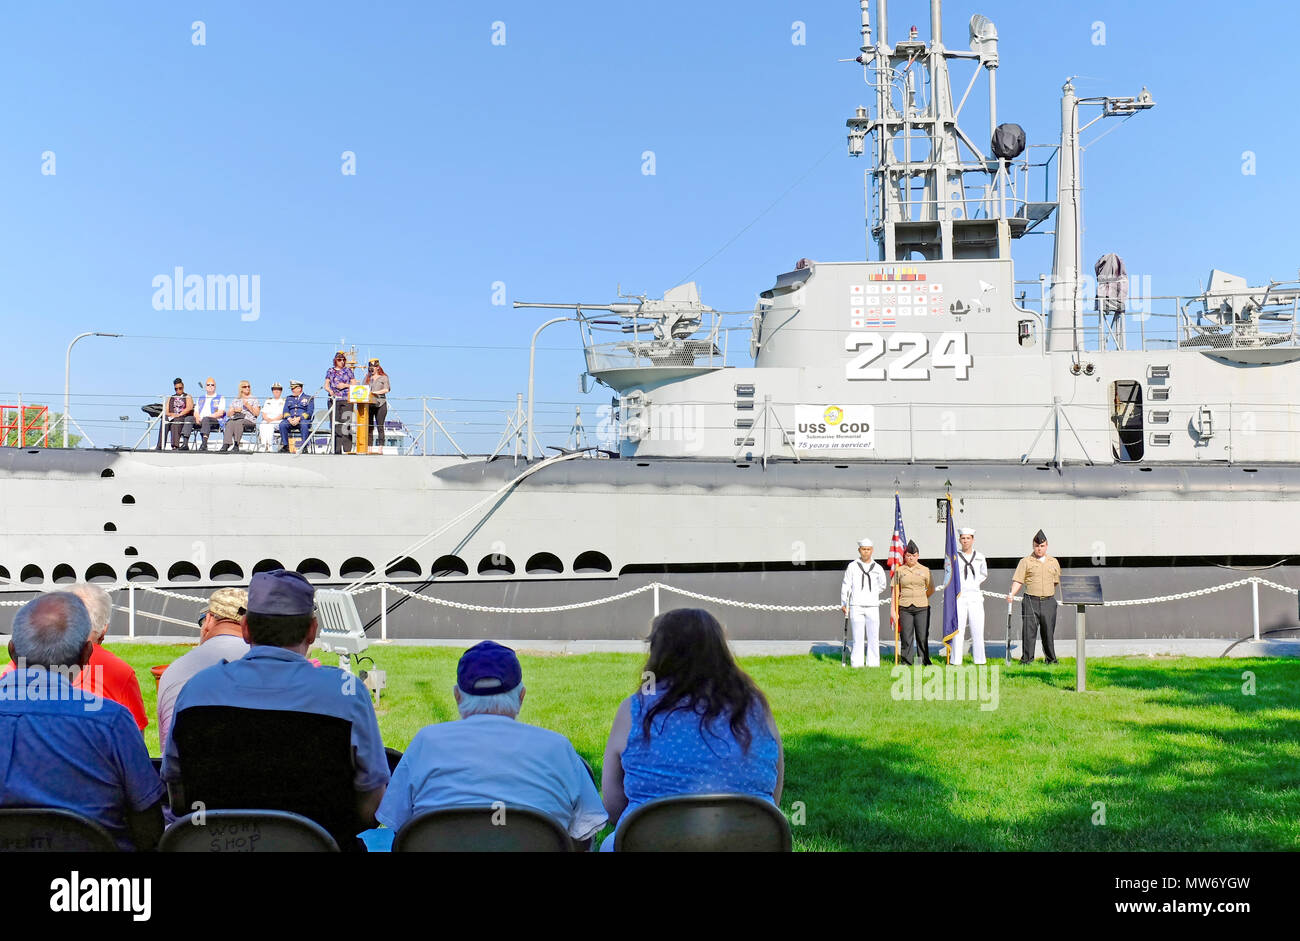 2018 Memorial Day remembrances during a wreath laying ceremony for veterans who died in service at the USS Cod Submarine in Cleveland, Ohio, USA. Stock Photo